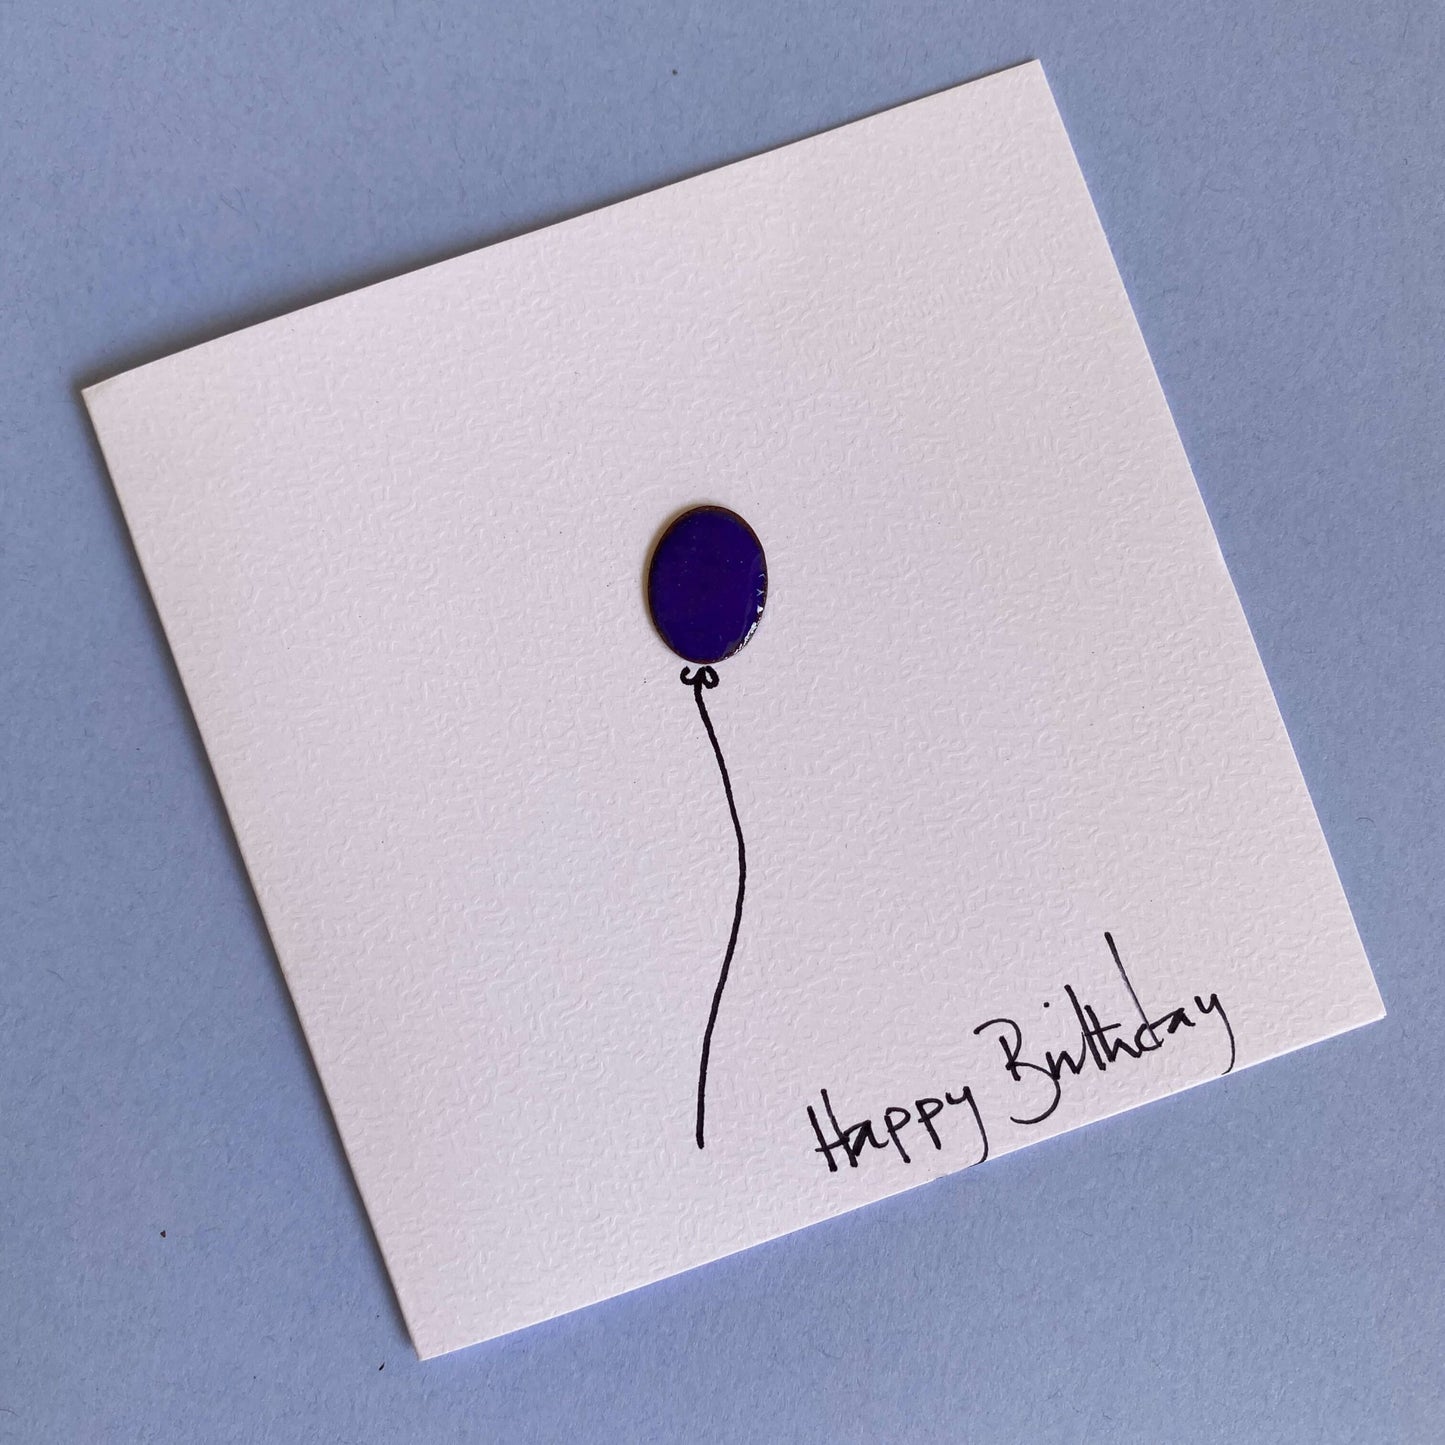 blue enamel balloon on the front of white greeting card with Happy Birthday handwritten text